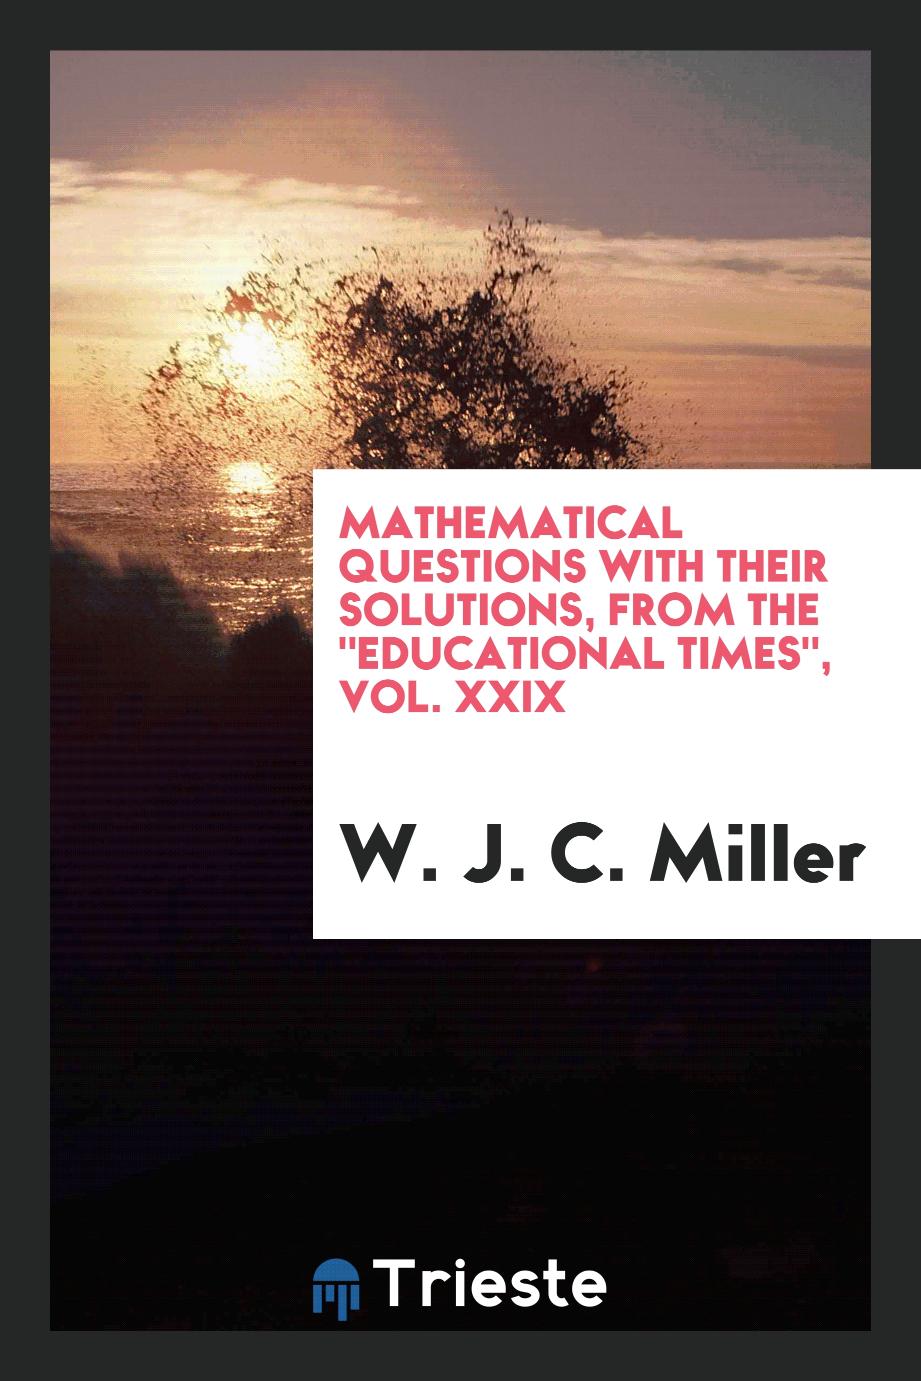 Mathematical Questions with Their Solutions, from The "Educational Times", Vol. XXIX